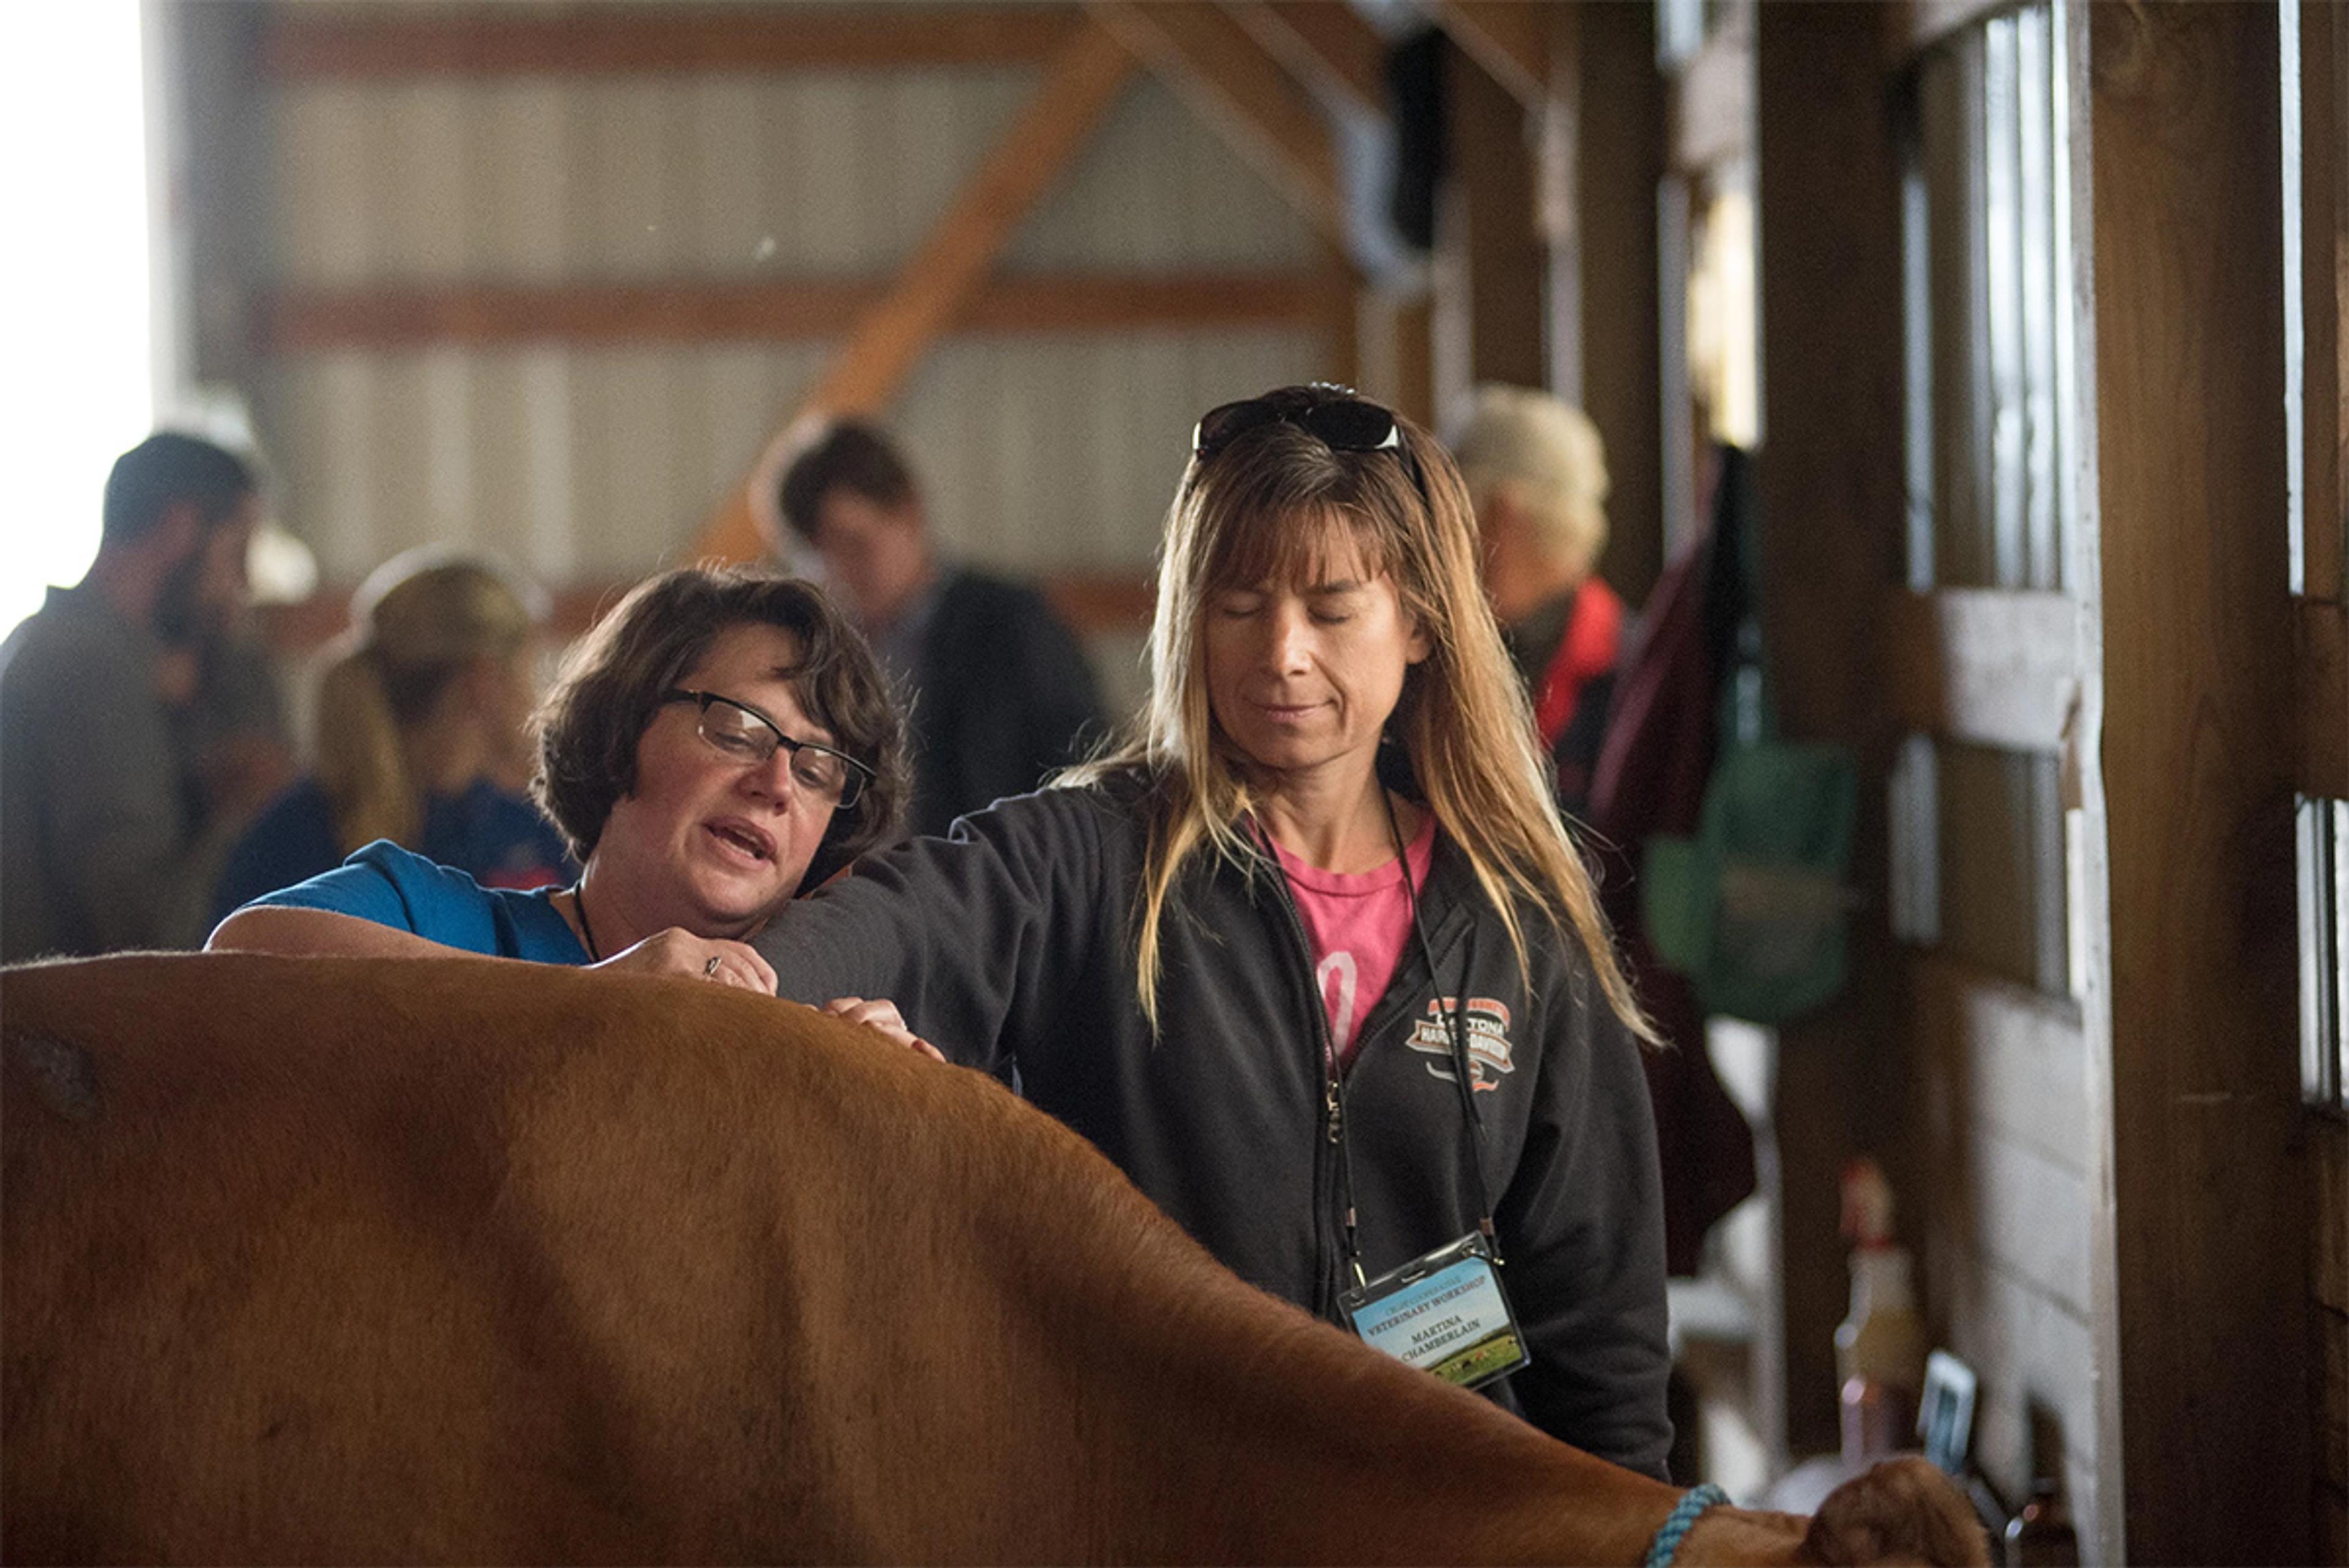 A livestock chiropractor shows an Organic Valley farmer how to feel for changes in a cow's body that could indicate it needs additional care.